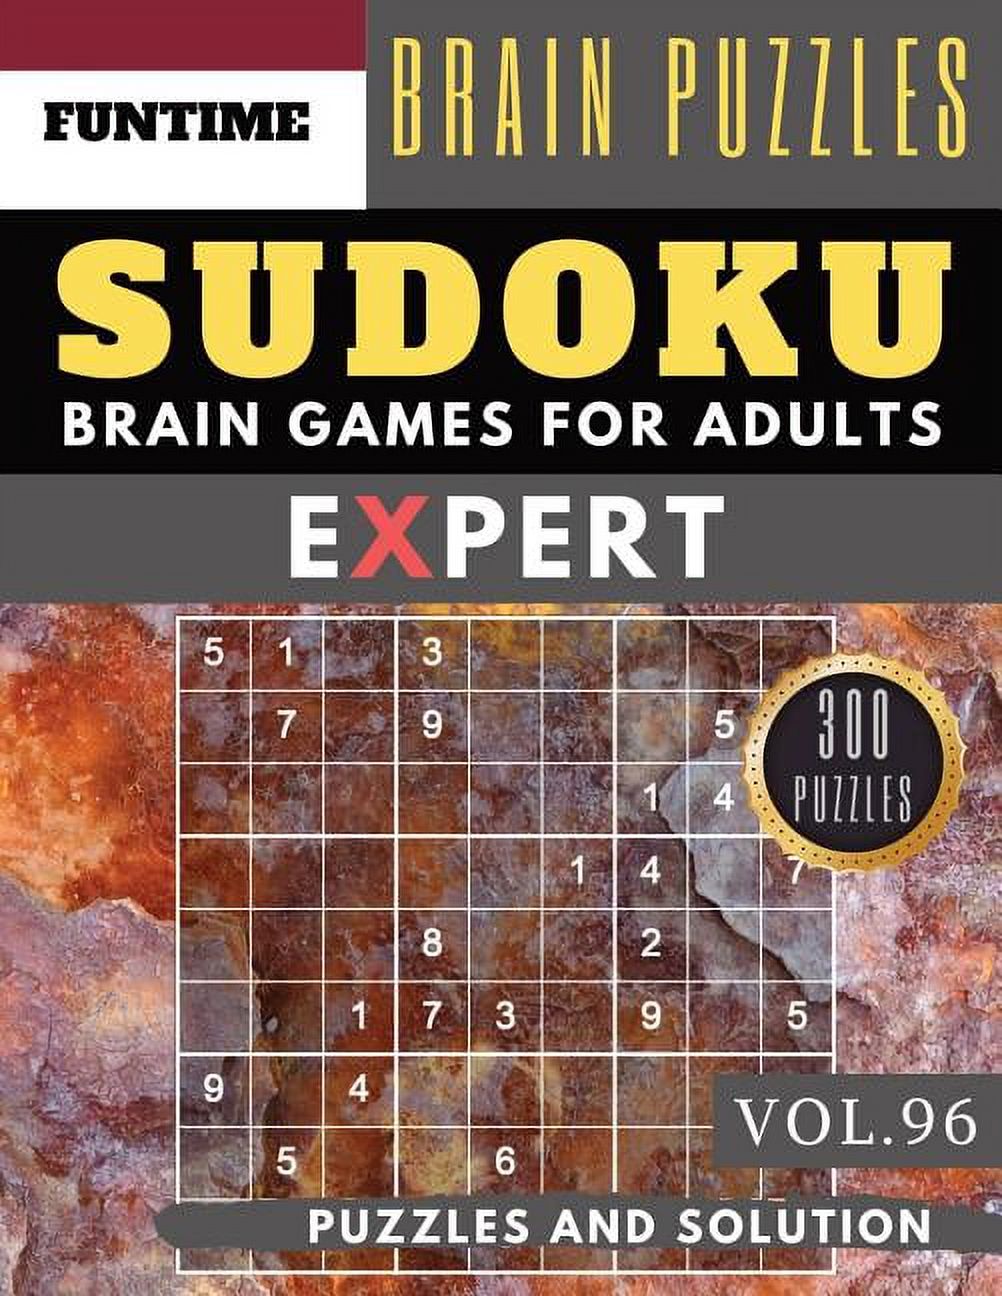 Expert Sudoku Puzzle Books: Expert SUDOKU : 300 SUDOKU extremely hard puzzle books - sudoku hard to extreme difficulty Maths Book Puzzles and Solutions times for Adult and Senior (hard sudoku puzzle books Vol.96) (Series #96) (Paperback) - image 1 of 1